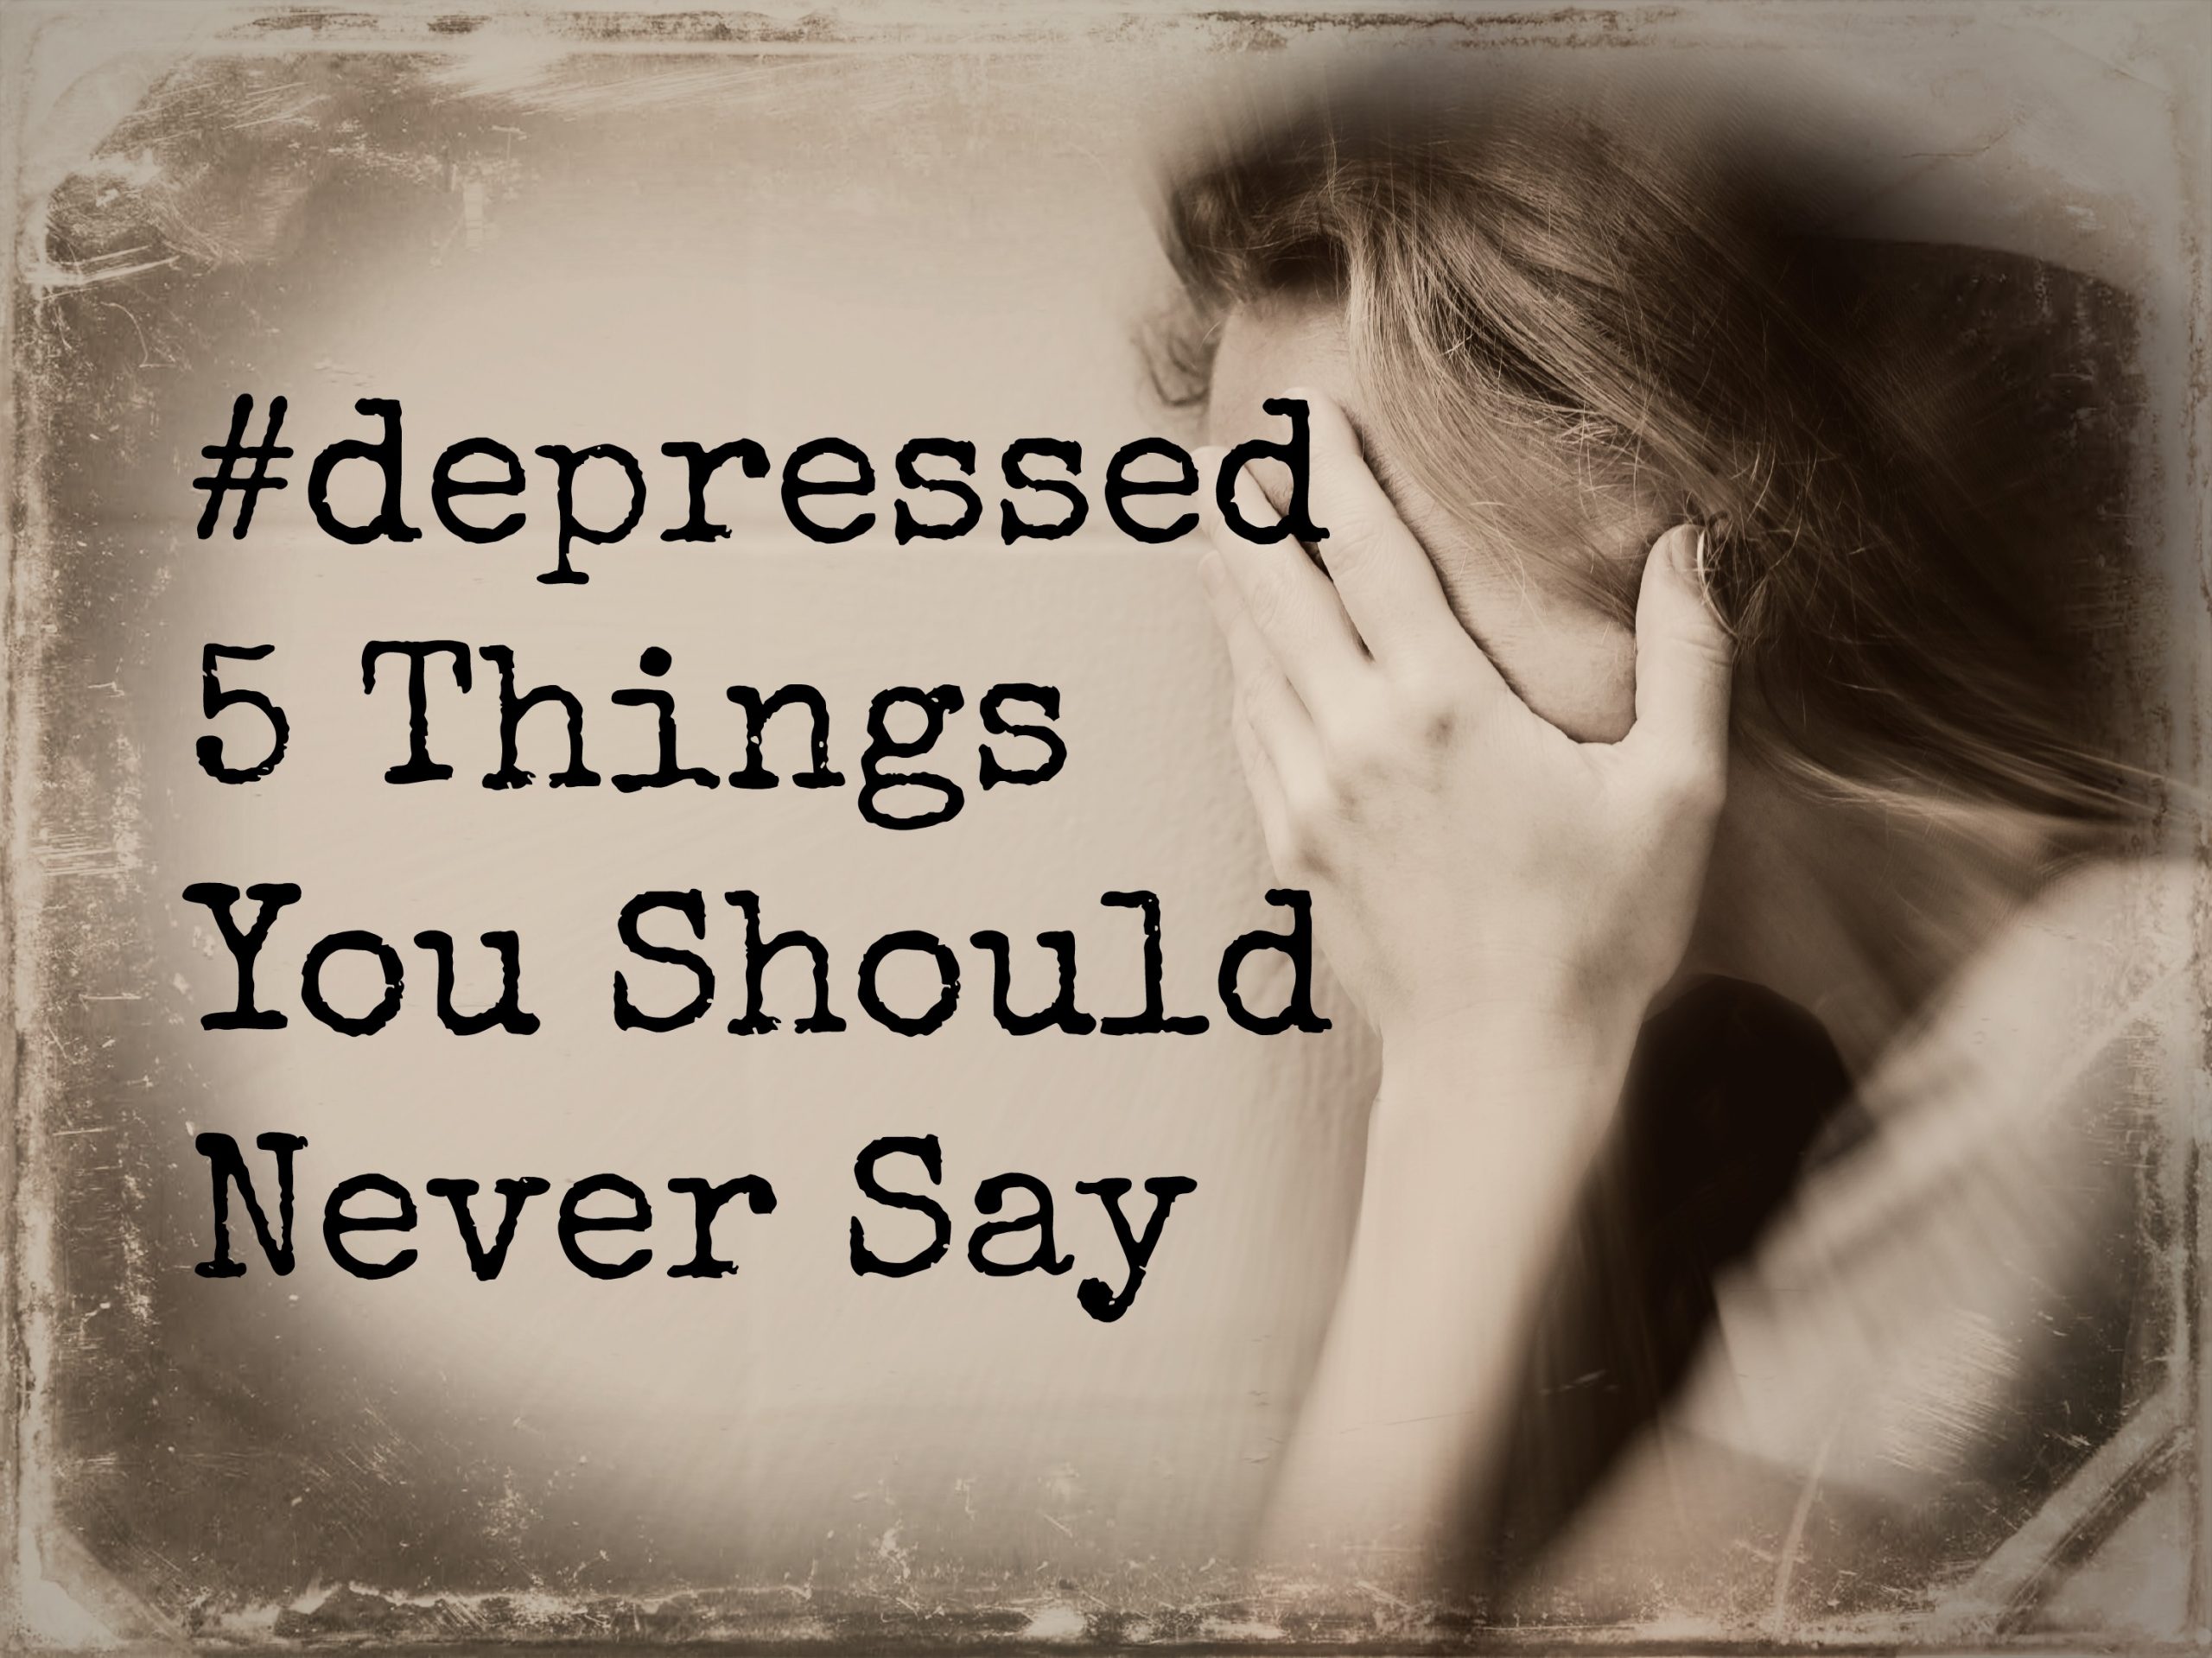 5 Things You Should Never Say #depressed